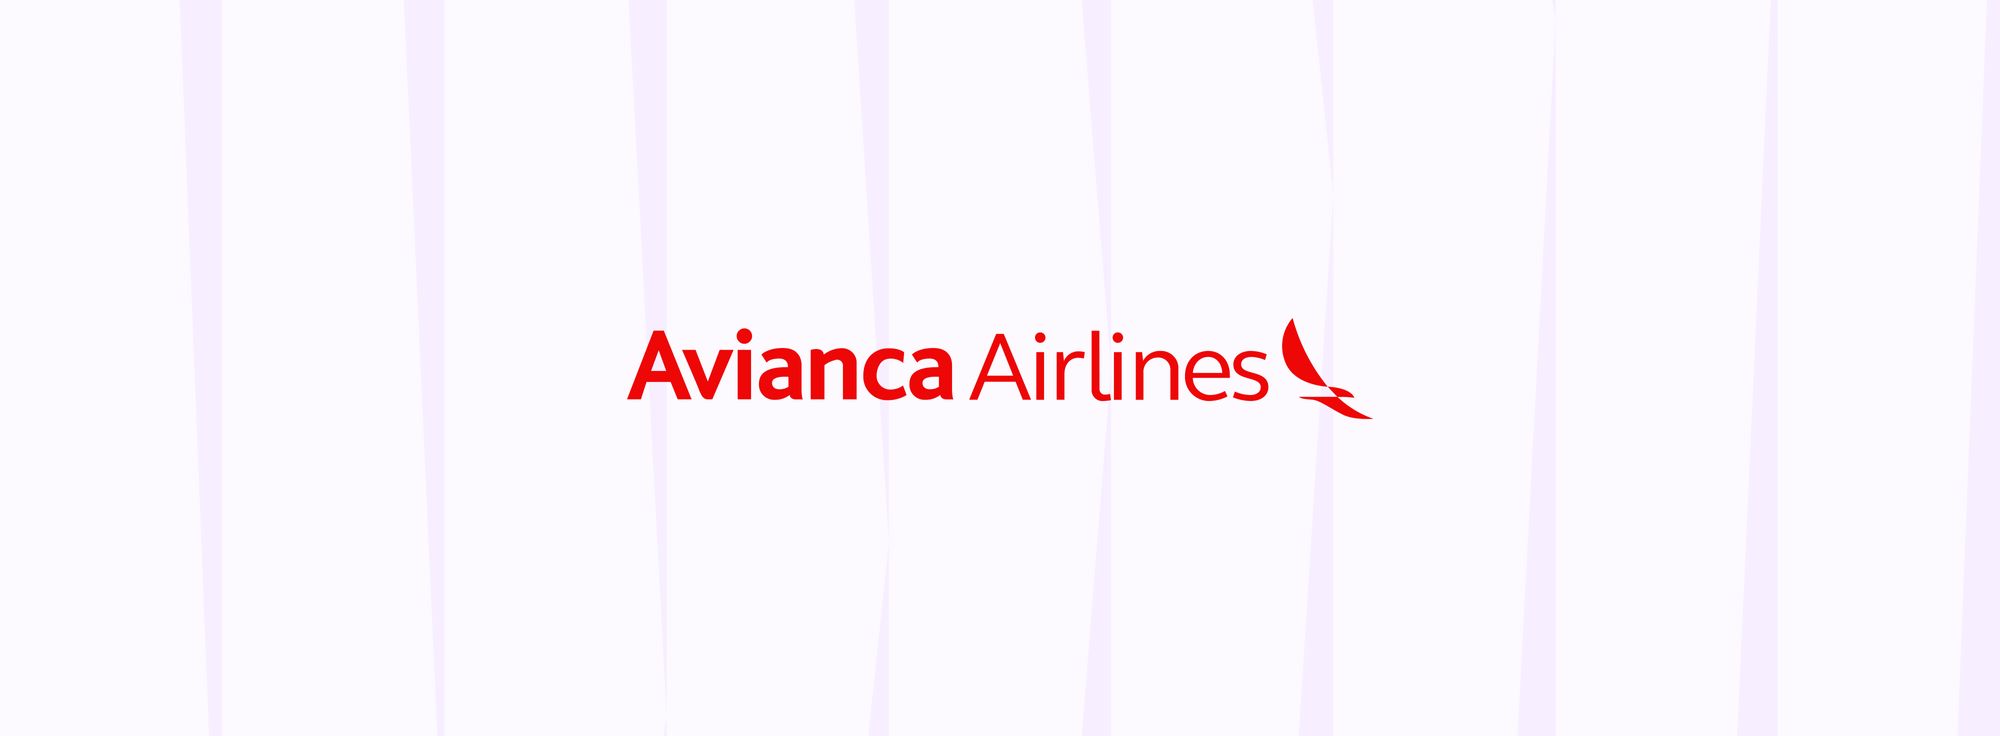 Avianca Airlines becomes another major NDC airline live on Duffel